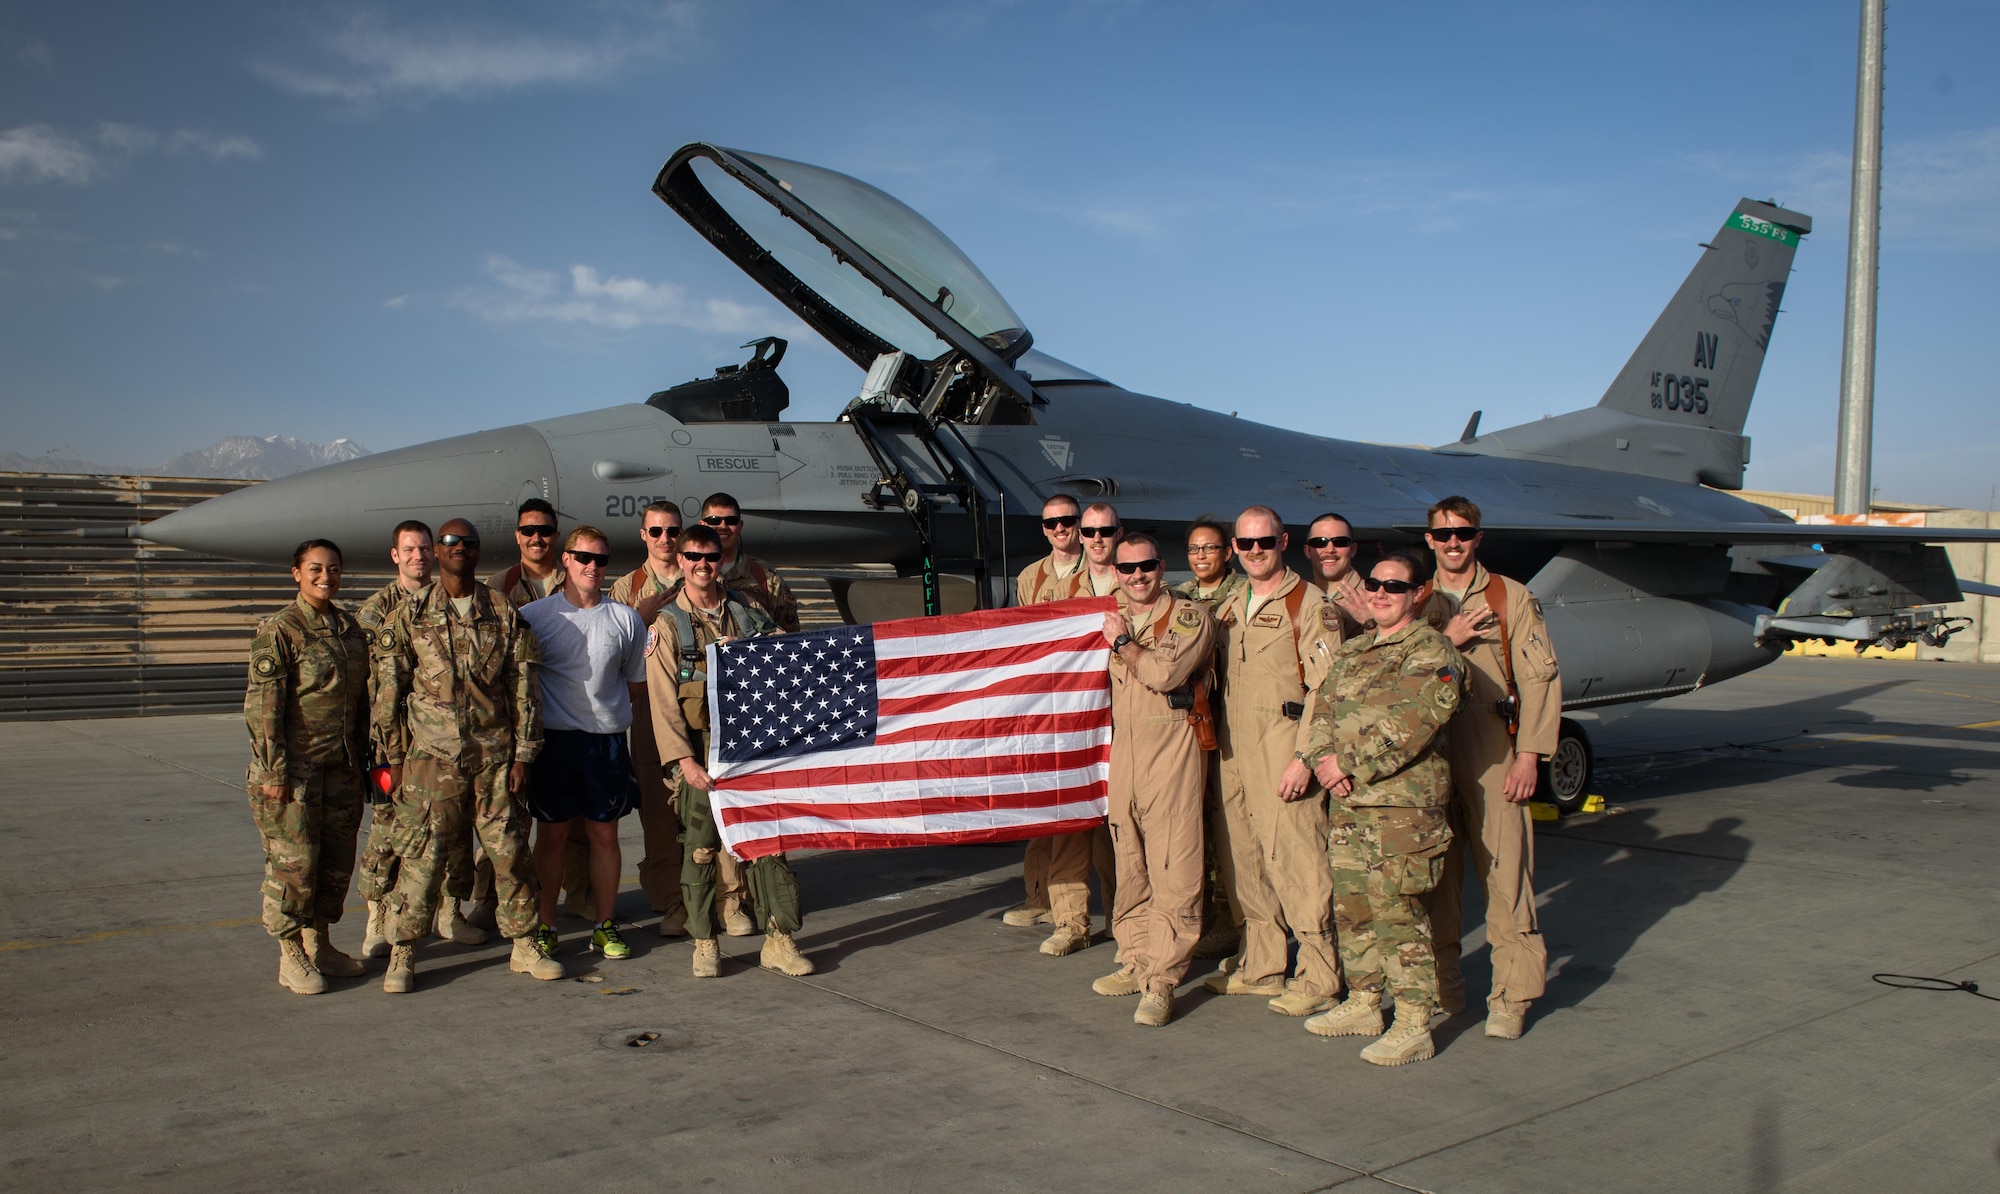 Lt. Col. Vince O’Connor, the commander of the 555th Expeditionary Fighter Squadron, holds the American flag with members of the 555th EFS at Bagram Airfield, Afghanistan, May 19, 2017, after surpassing 2,000 career flight hours. O’Connor has flown all over the world to include Afghanistan, Europe and Pacific region. (U.S. Air Force photo by Staff Sgt. Benjamin Gonsier)